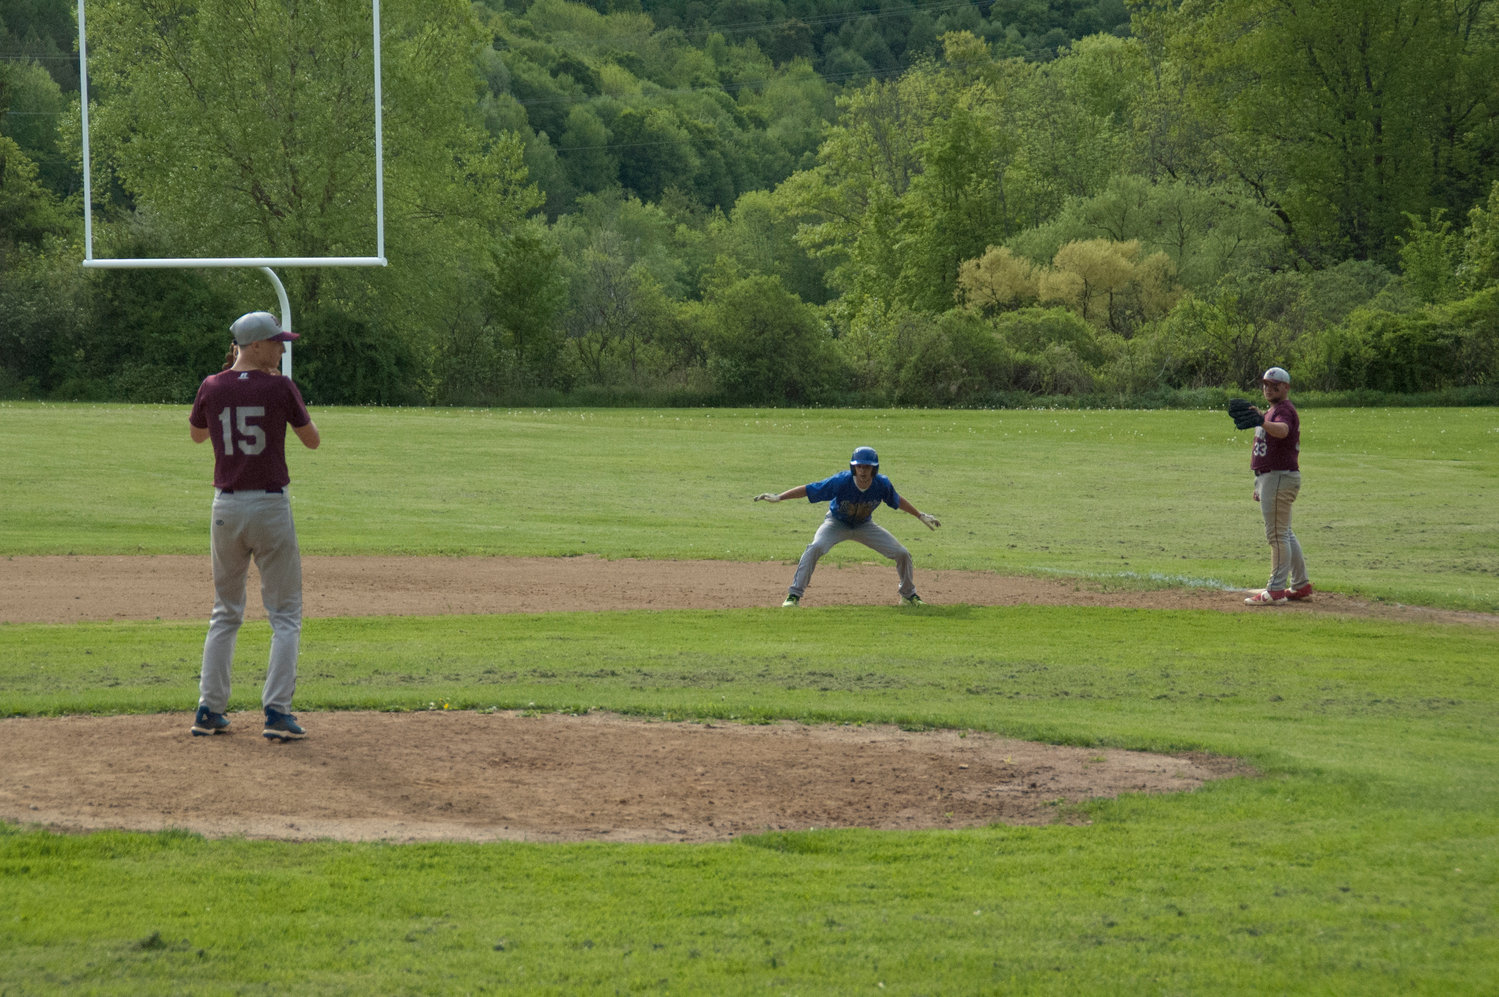 Livingston Manor’s crafty lefty, Nathan Bowers, picked off a few unsuspecting runners at first base.